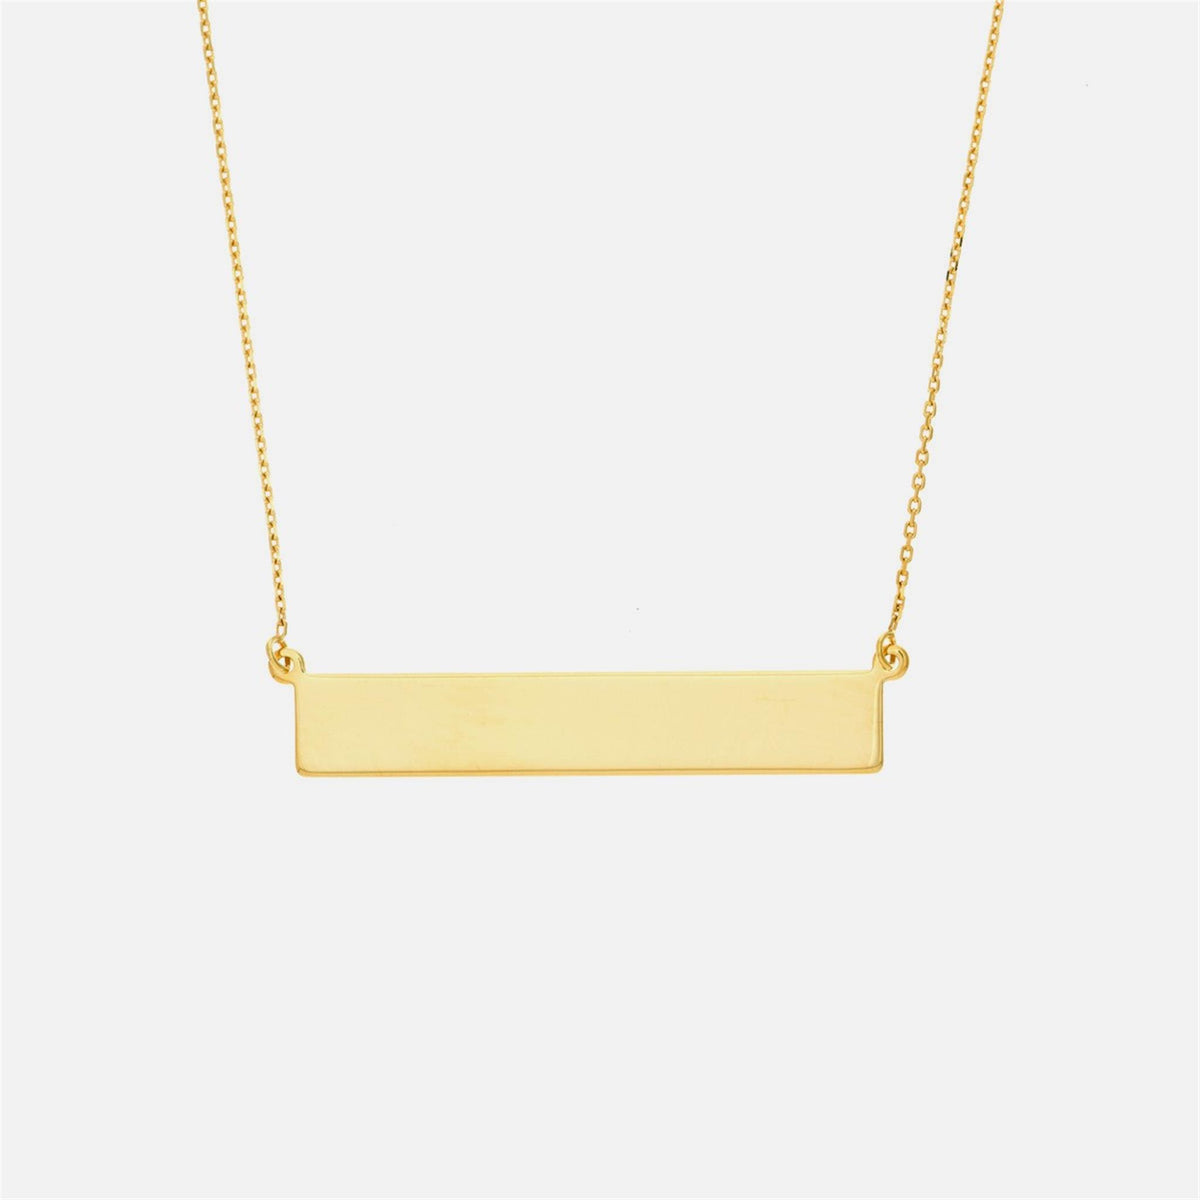 14Kt Yellow Gold East-West Engravealbe Bar Pendant